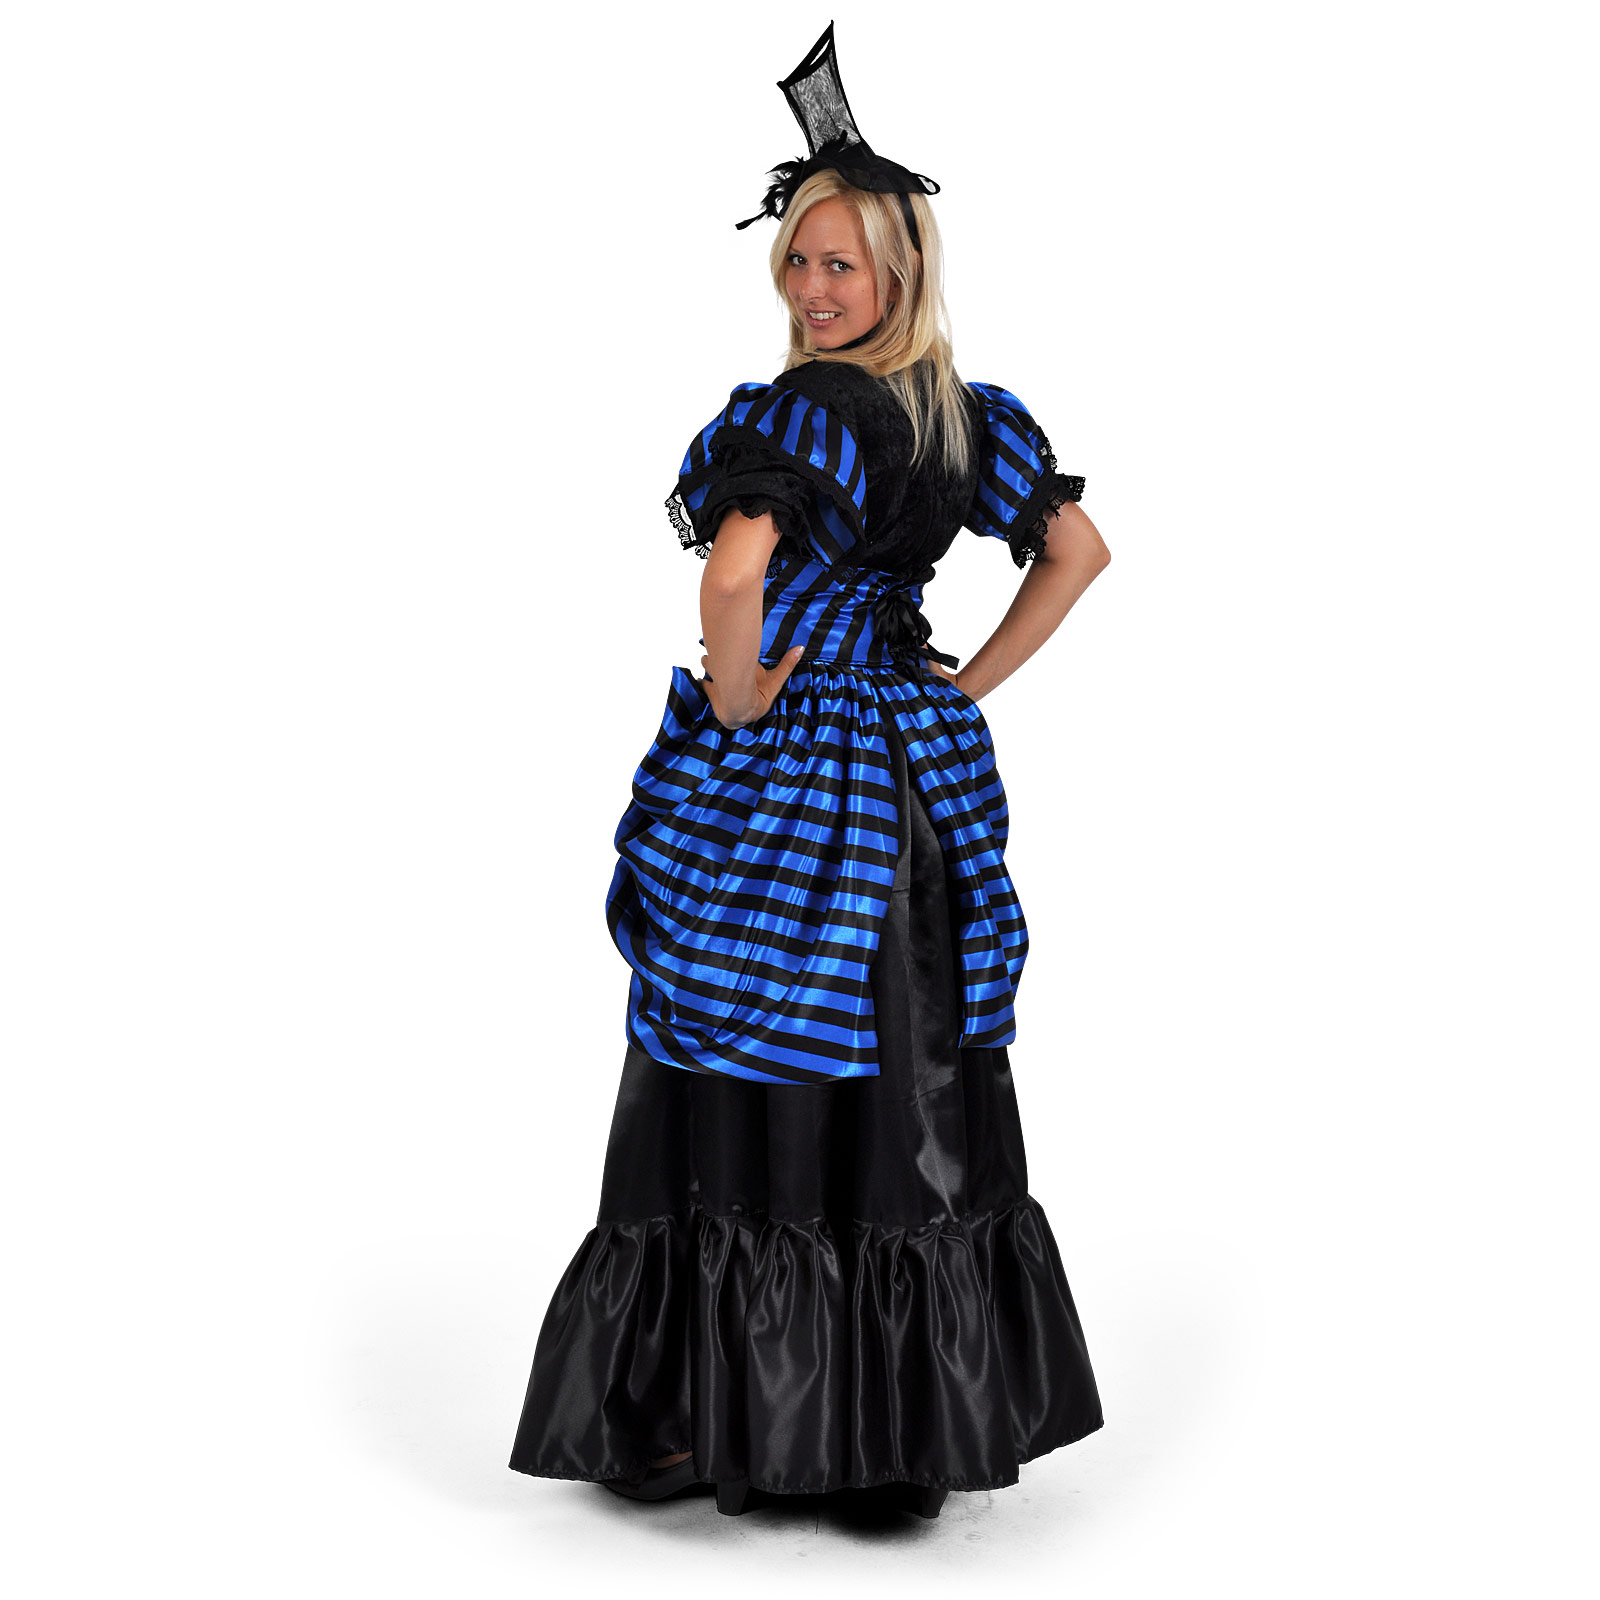 Madame Lilly - Costume Dress for Women